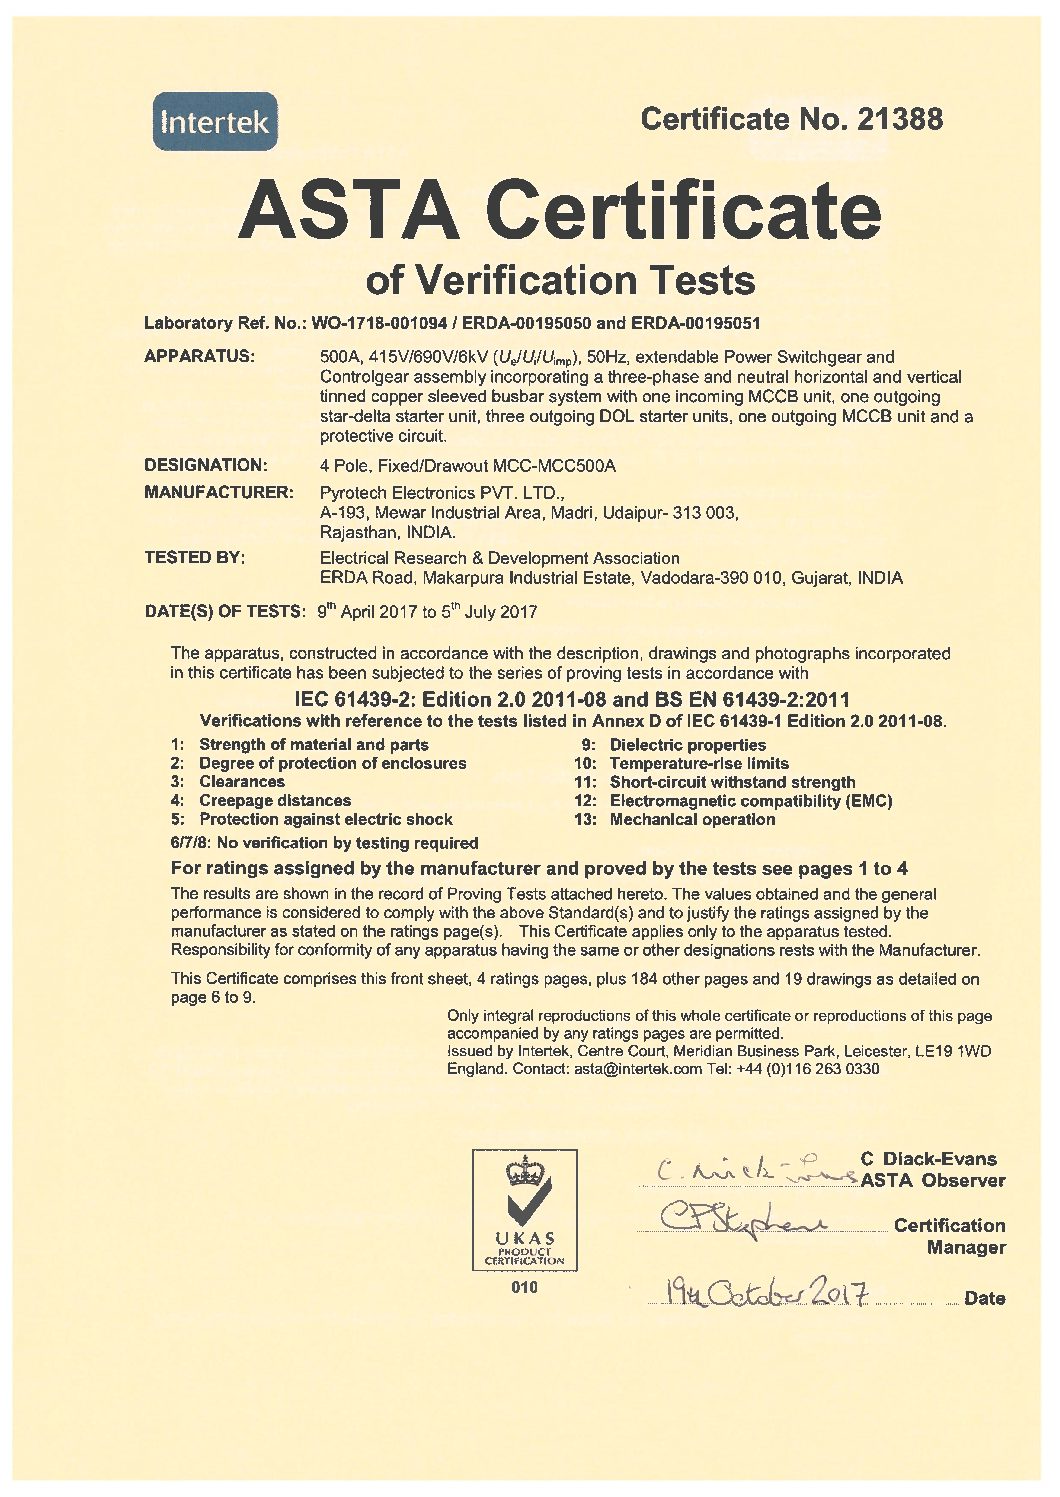 ASTA Certificate of verification tests